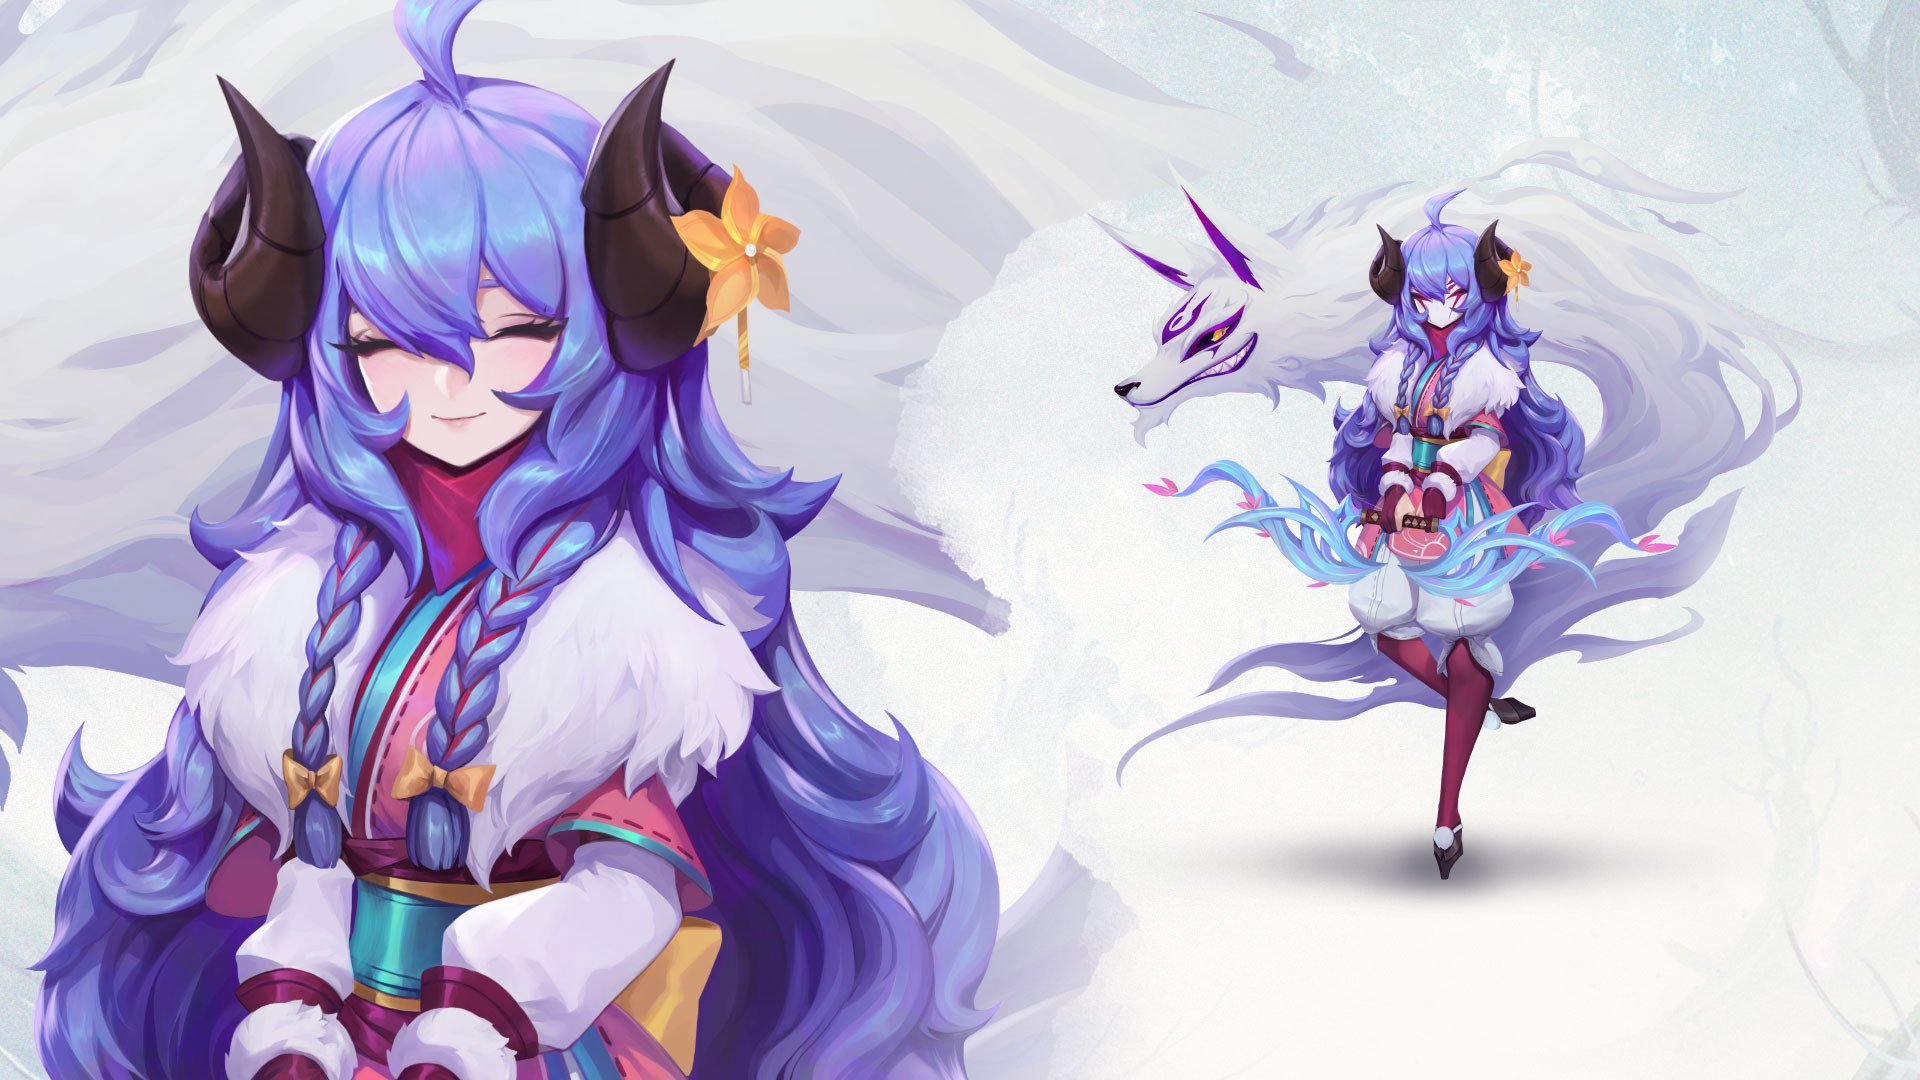 Anime 1920x1080 Spirit Blossom (League of Legends) League of Legends horns purple hair PC gaming video game art video game girls fantasy art fantasy girl closed eyes long hair